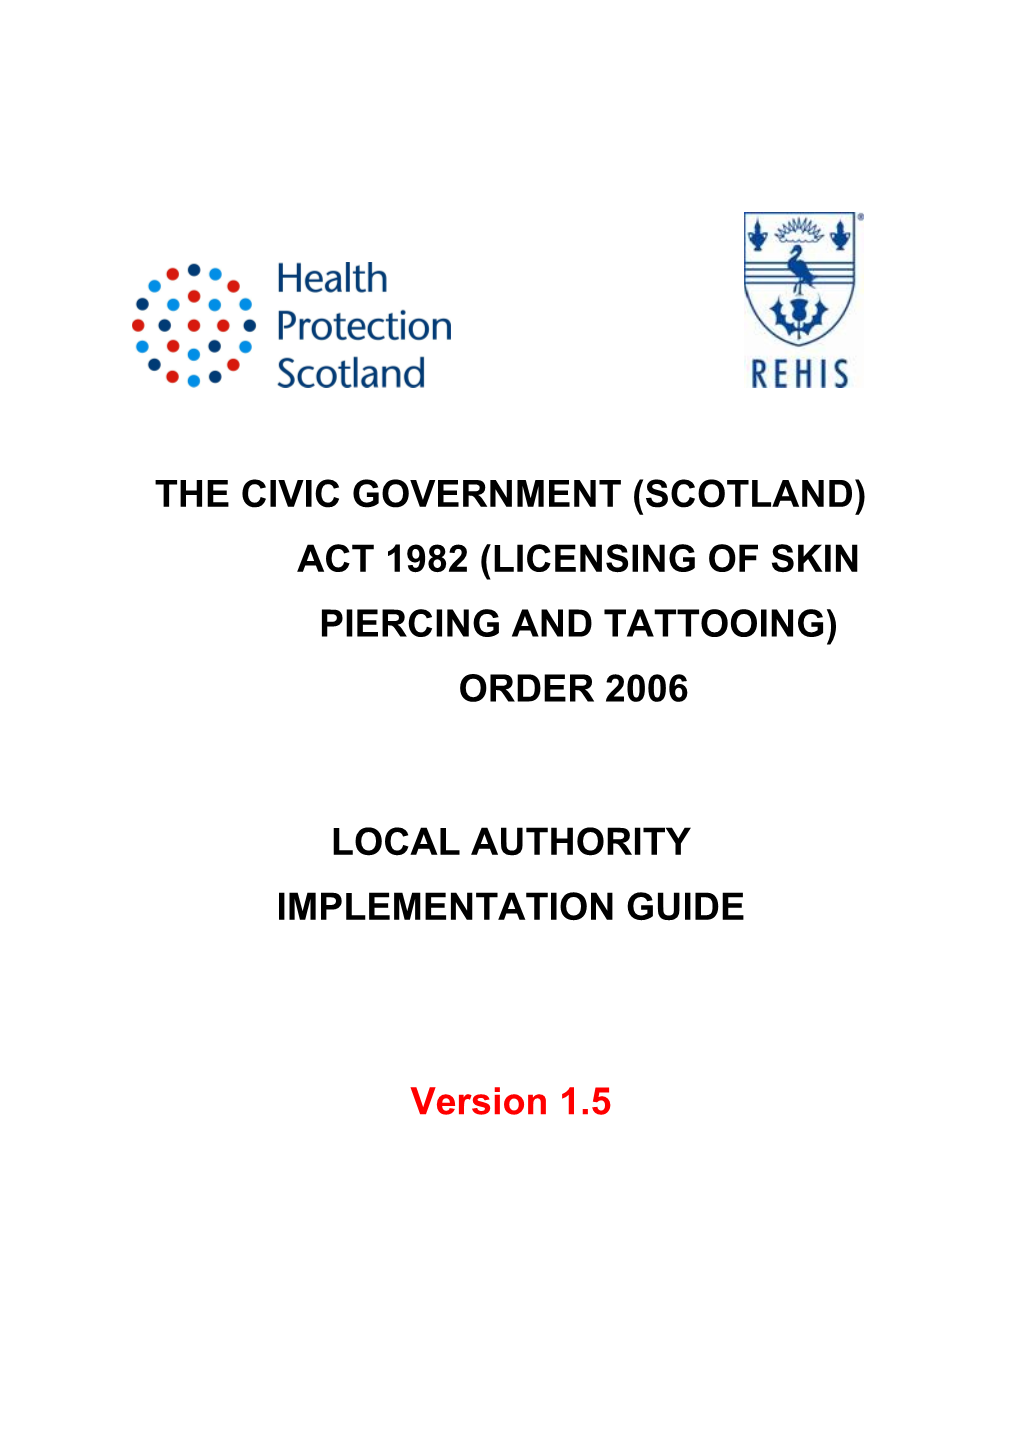 The Civic Government (Scotland) Act 1982 (Licensing of Skin Piercing and Tattooing) Order 2006